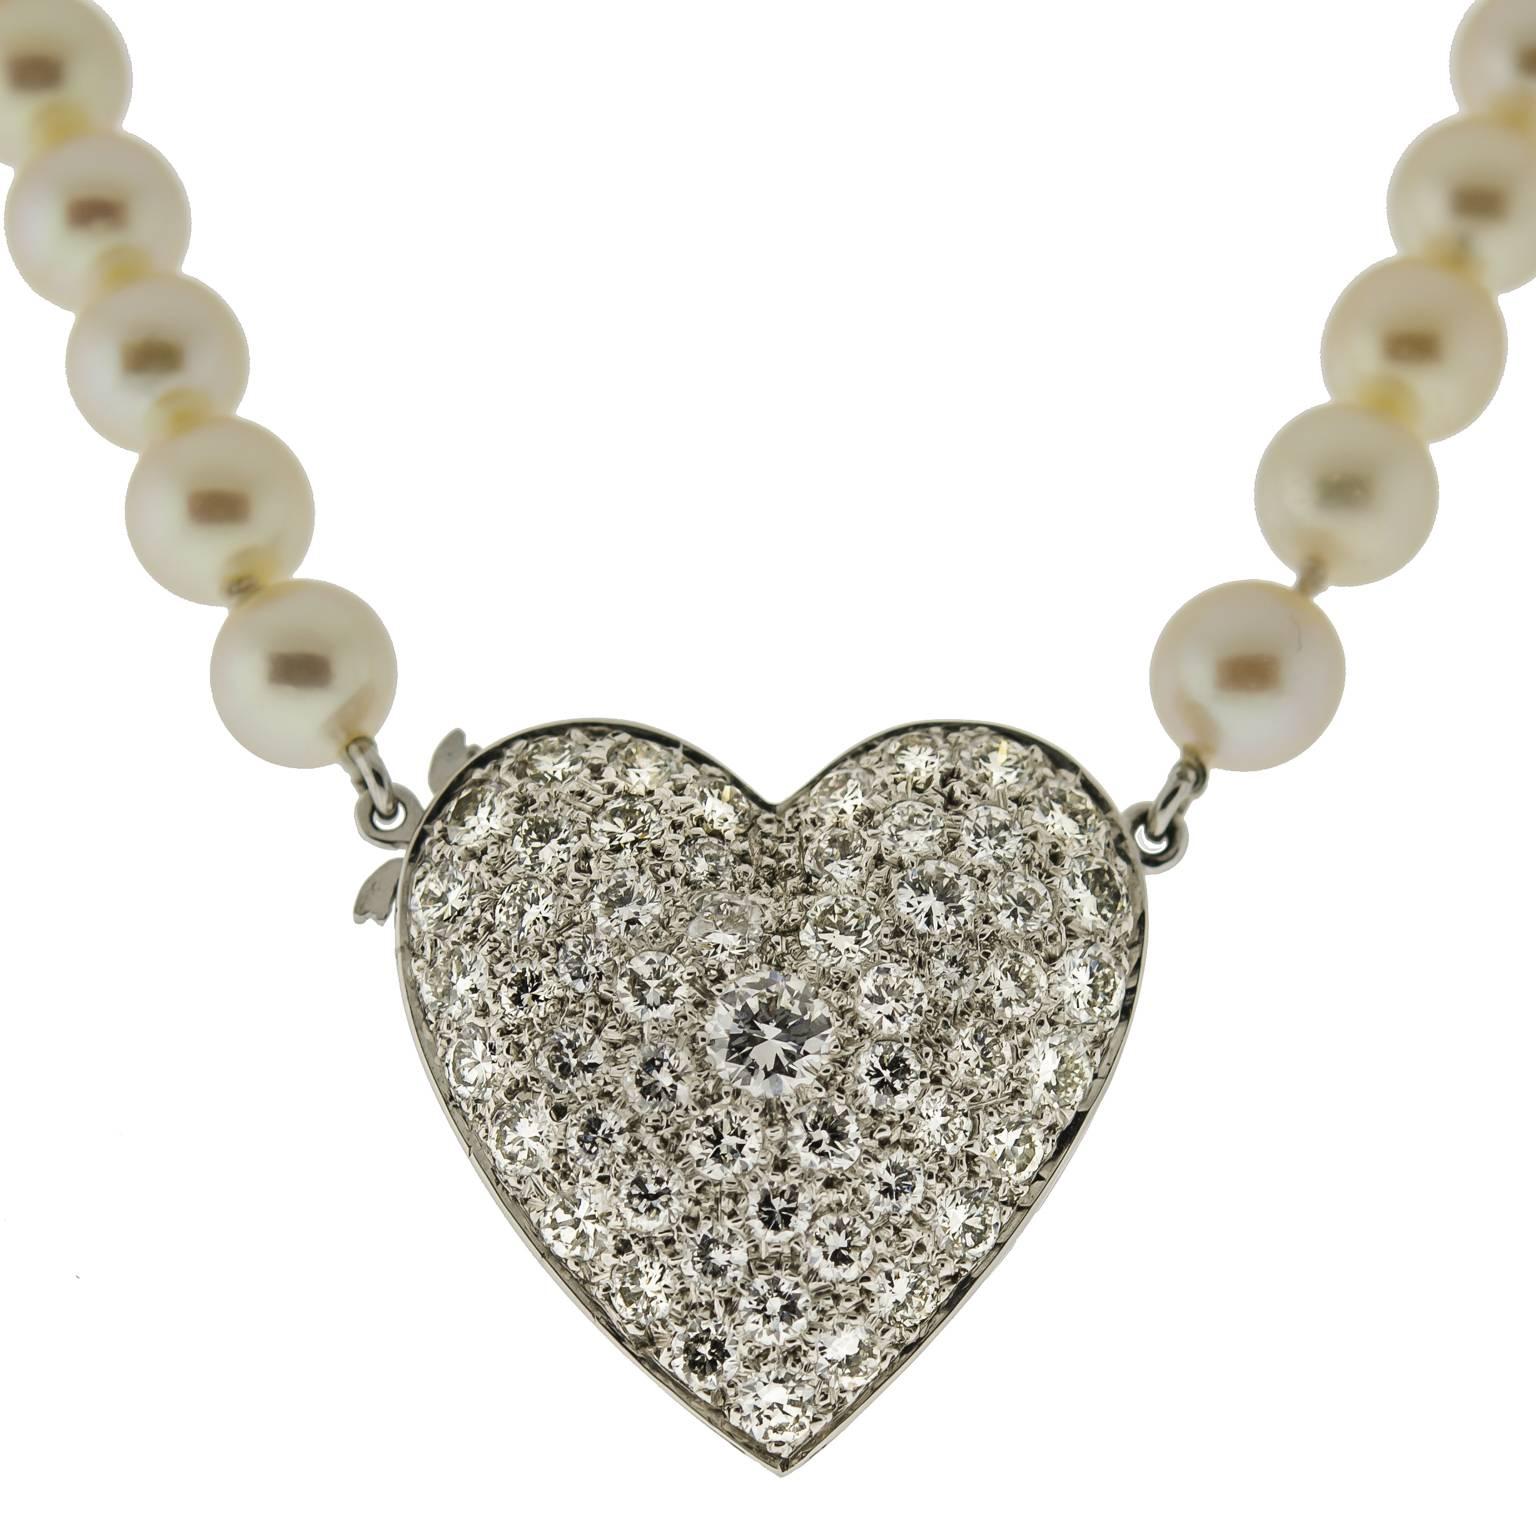 This beautiful Mid-Century cultured pearl and diamond heart necklace contains fifty-seven (57) 6mm near round cream-colored cultured pearls. One dazzling diamond and 14kt white gold heart clasp sits in the middle of this elegant necklace. The heart